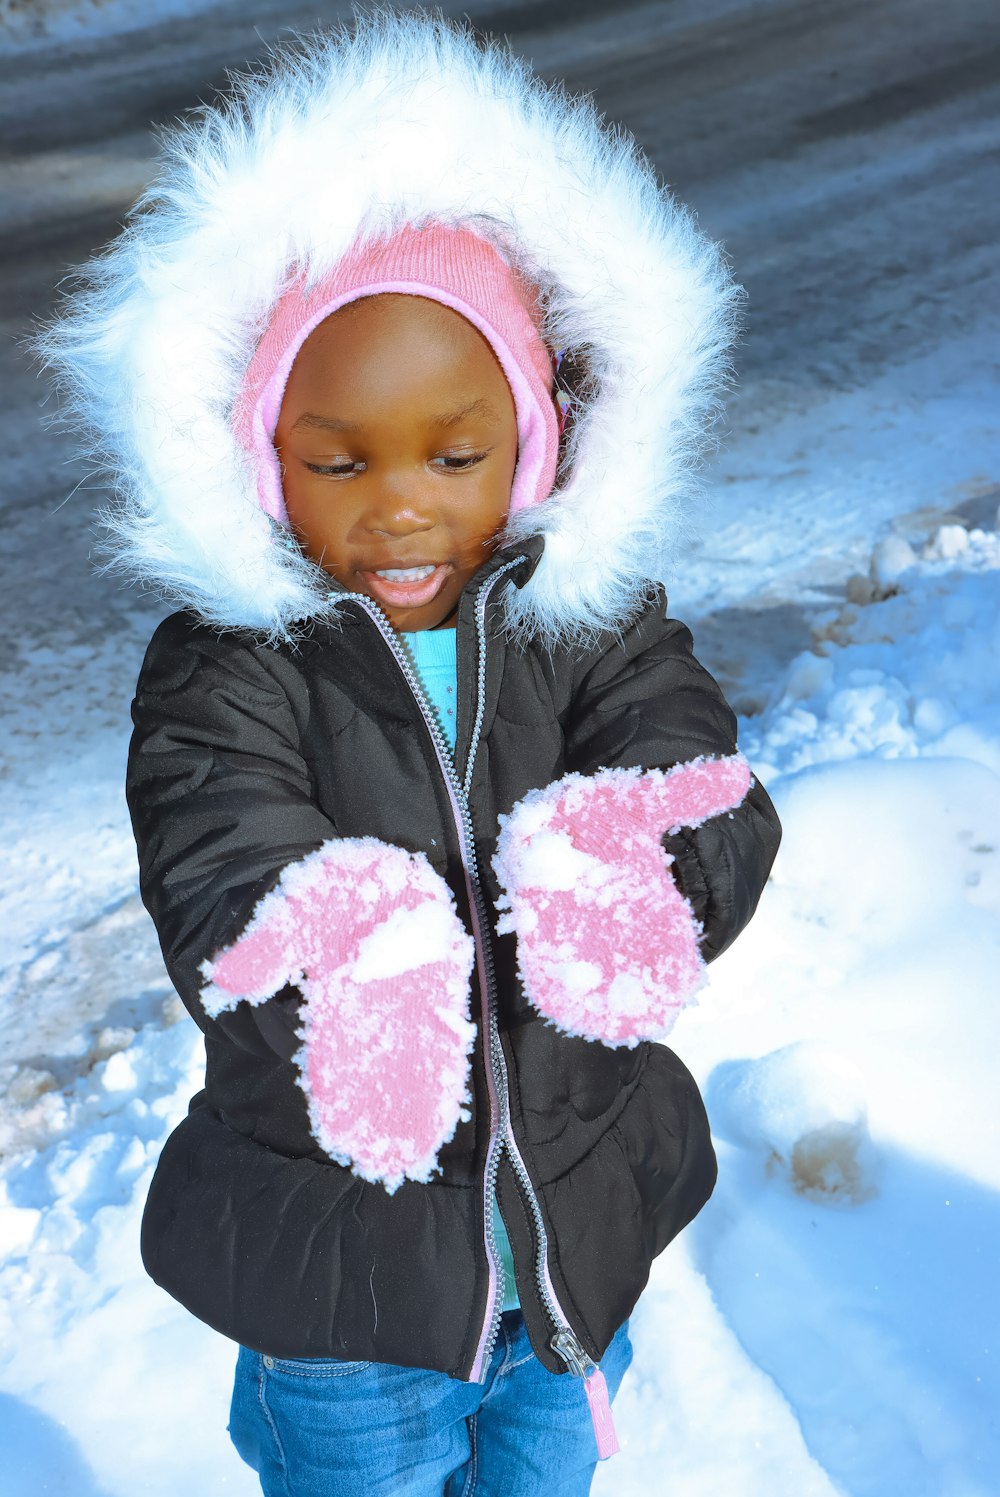 a small child wearing a winter coat and mittens